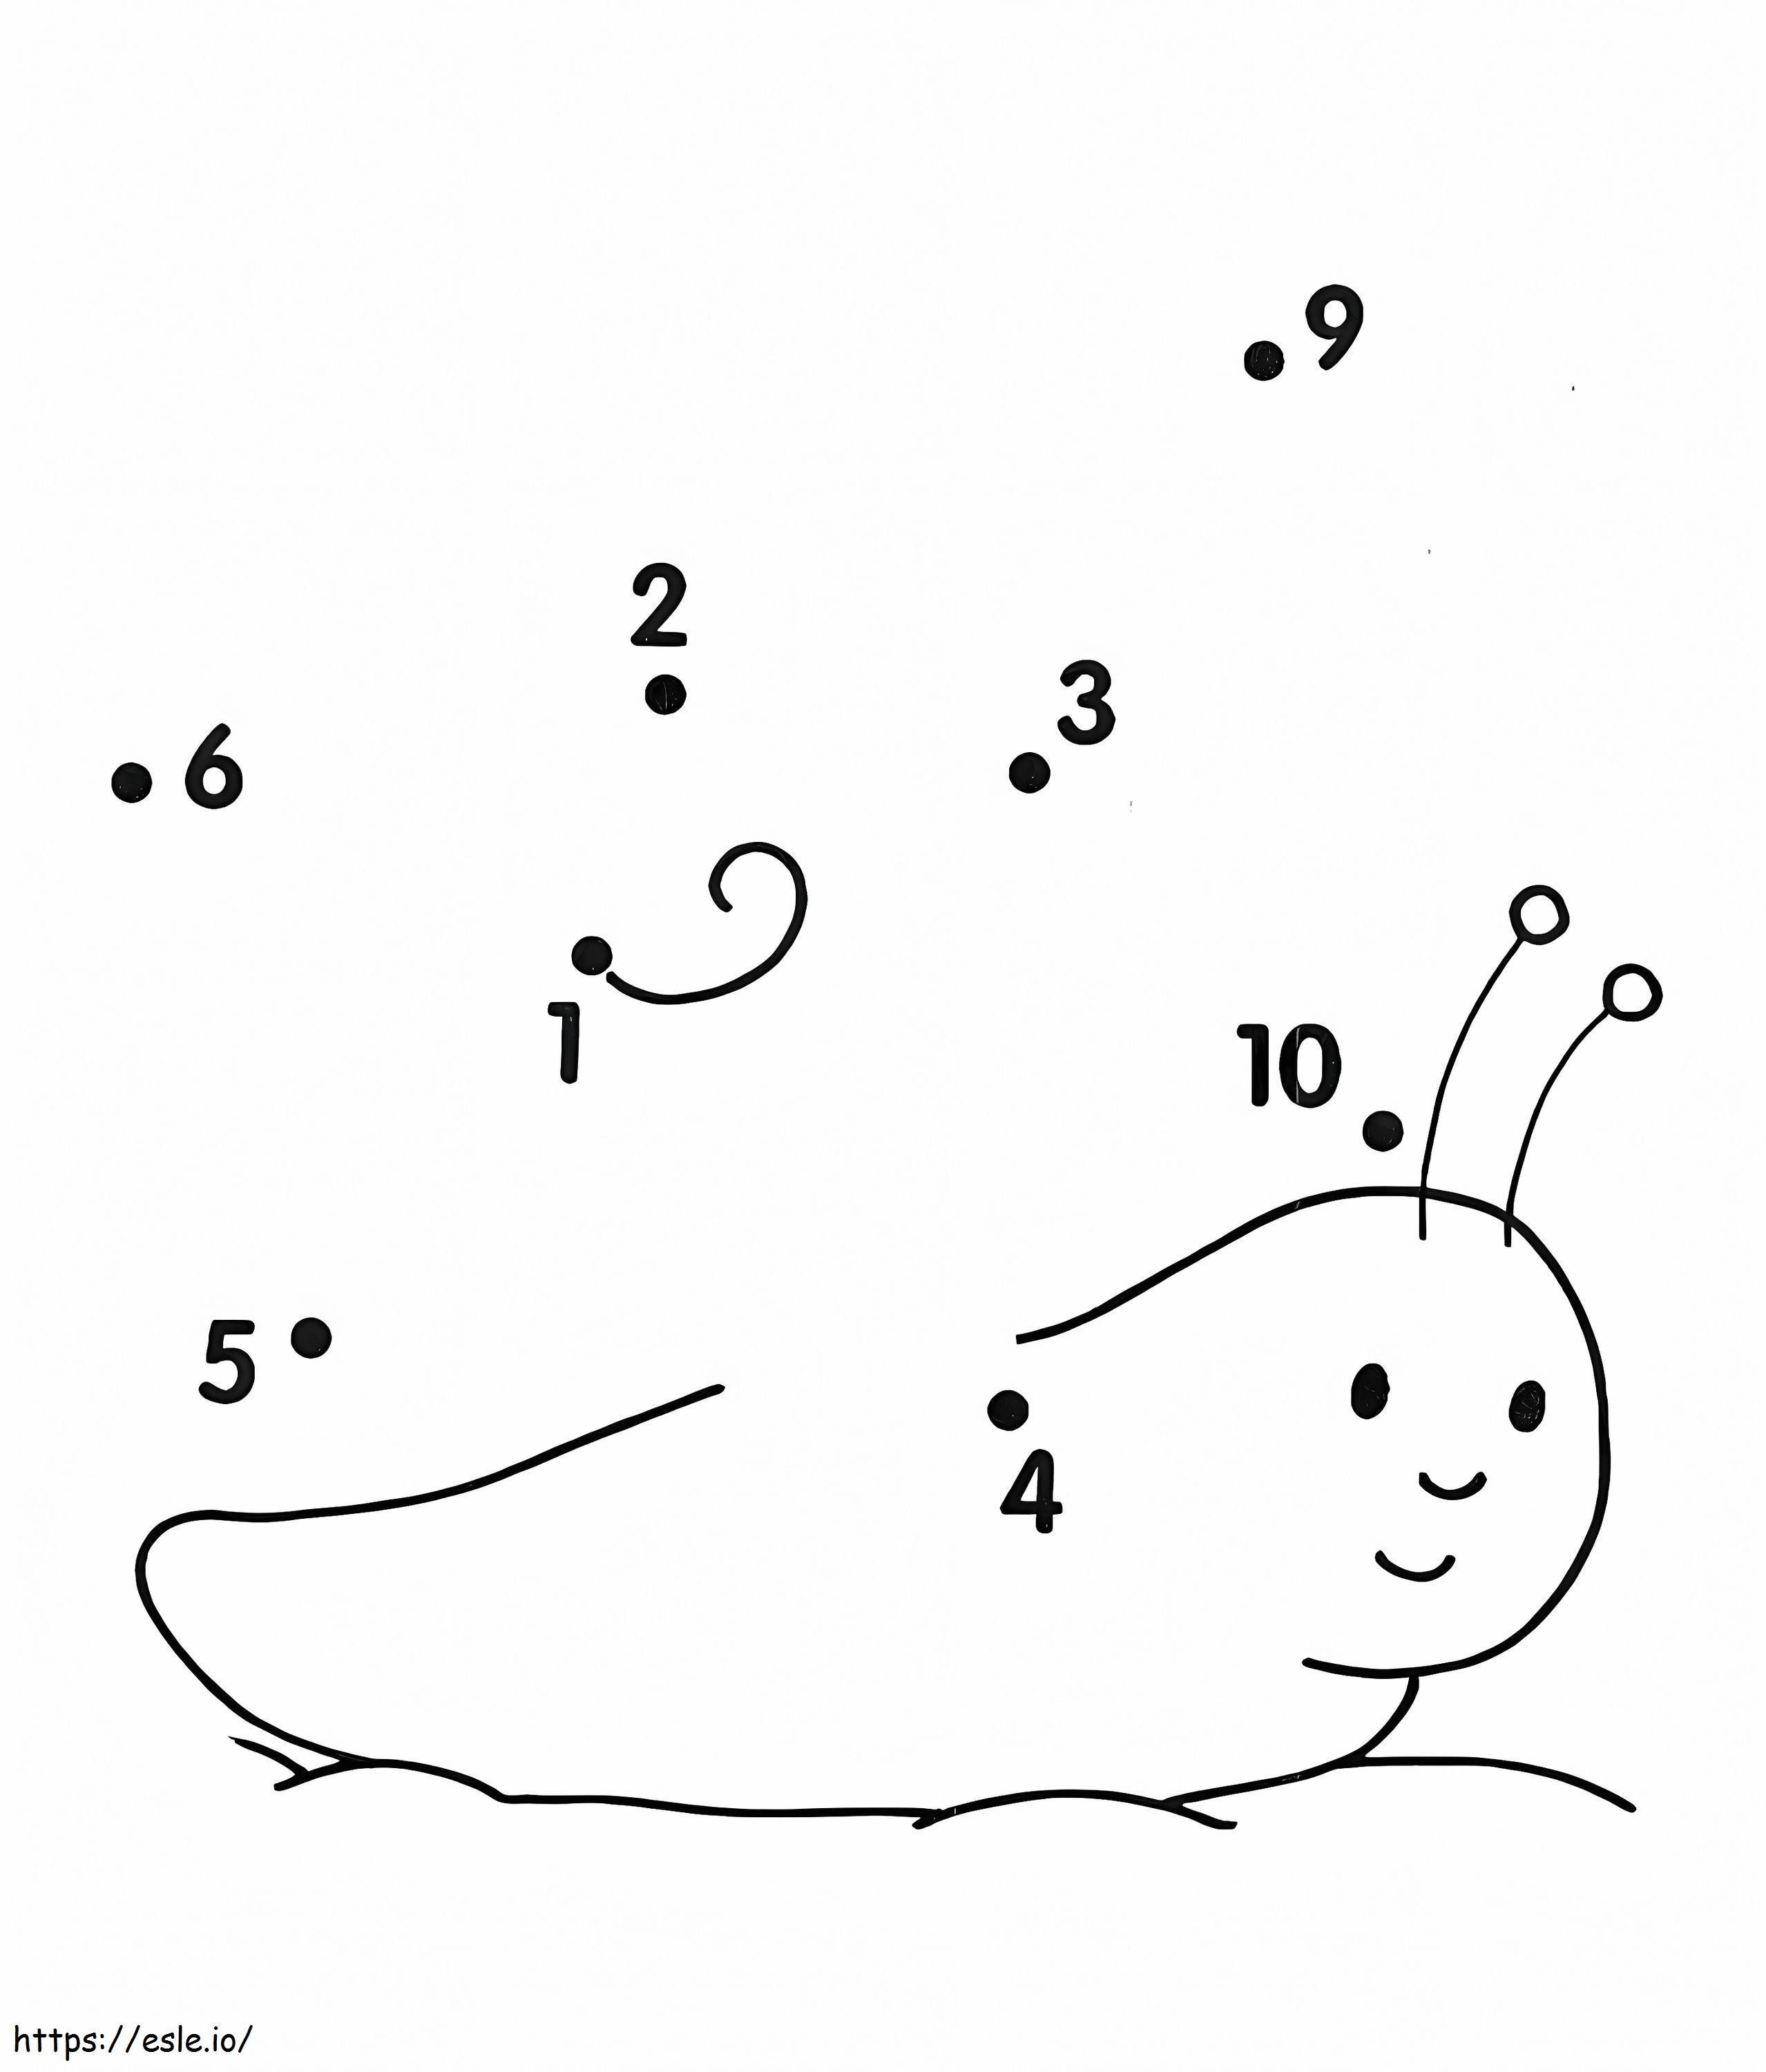  D Snail Dot To Worksheets Numbers 1 20 para colorir